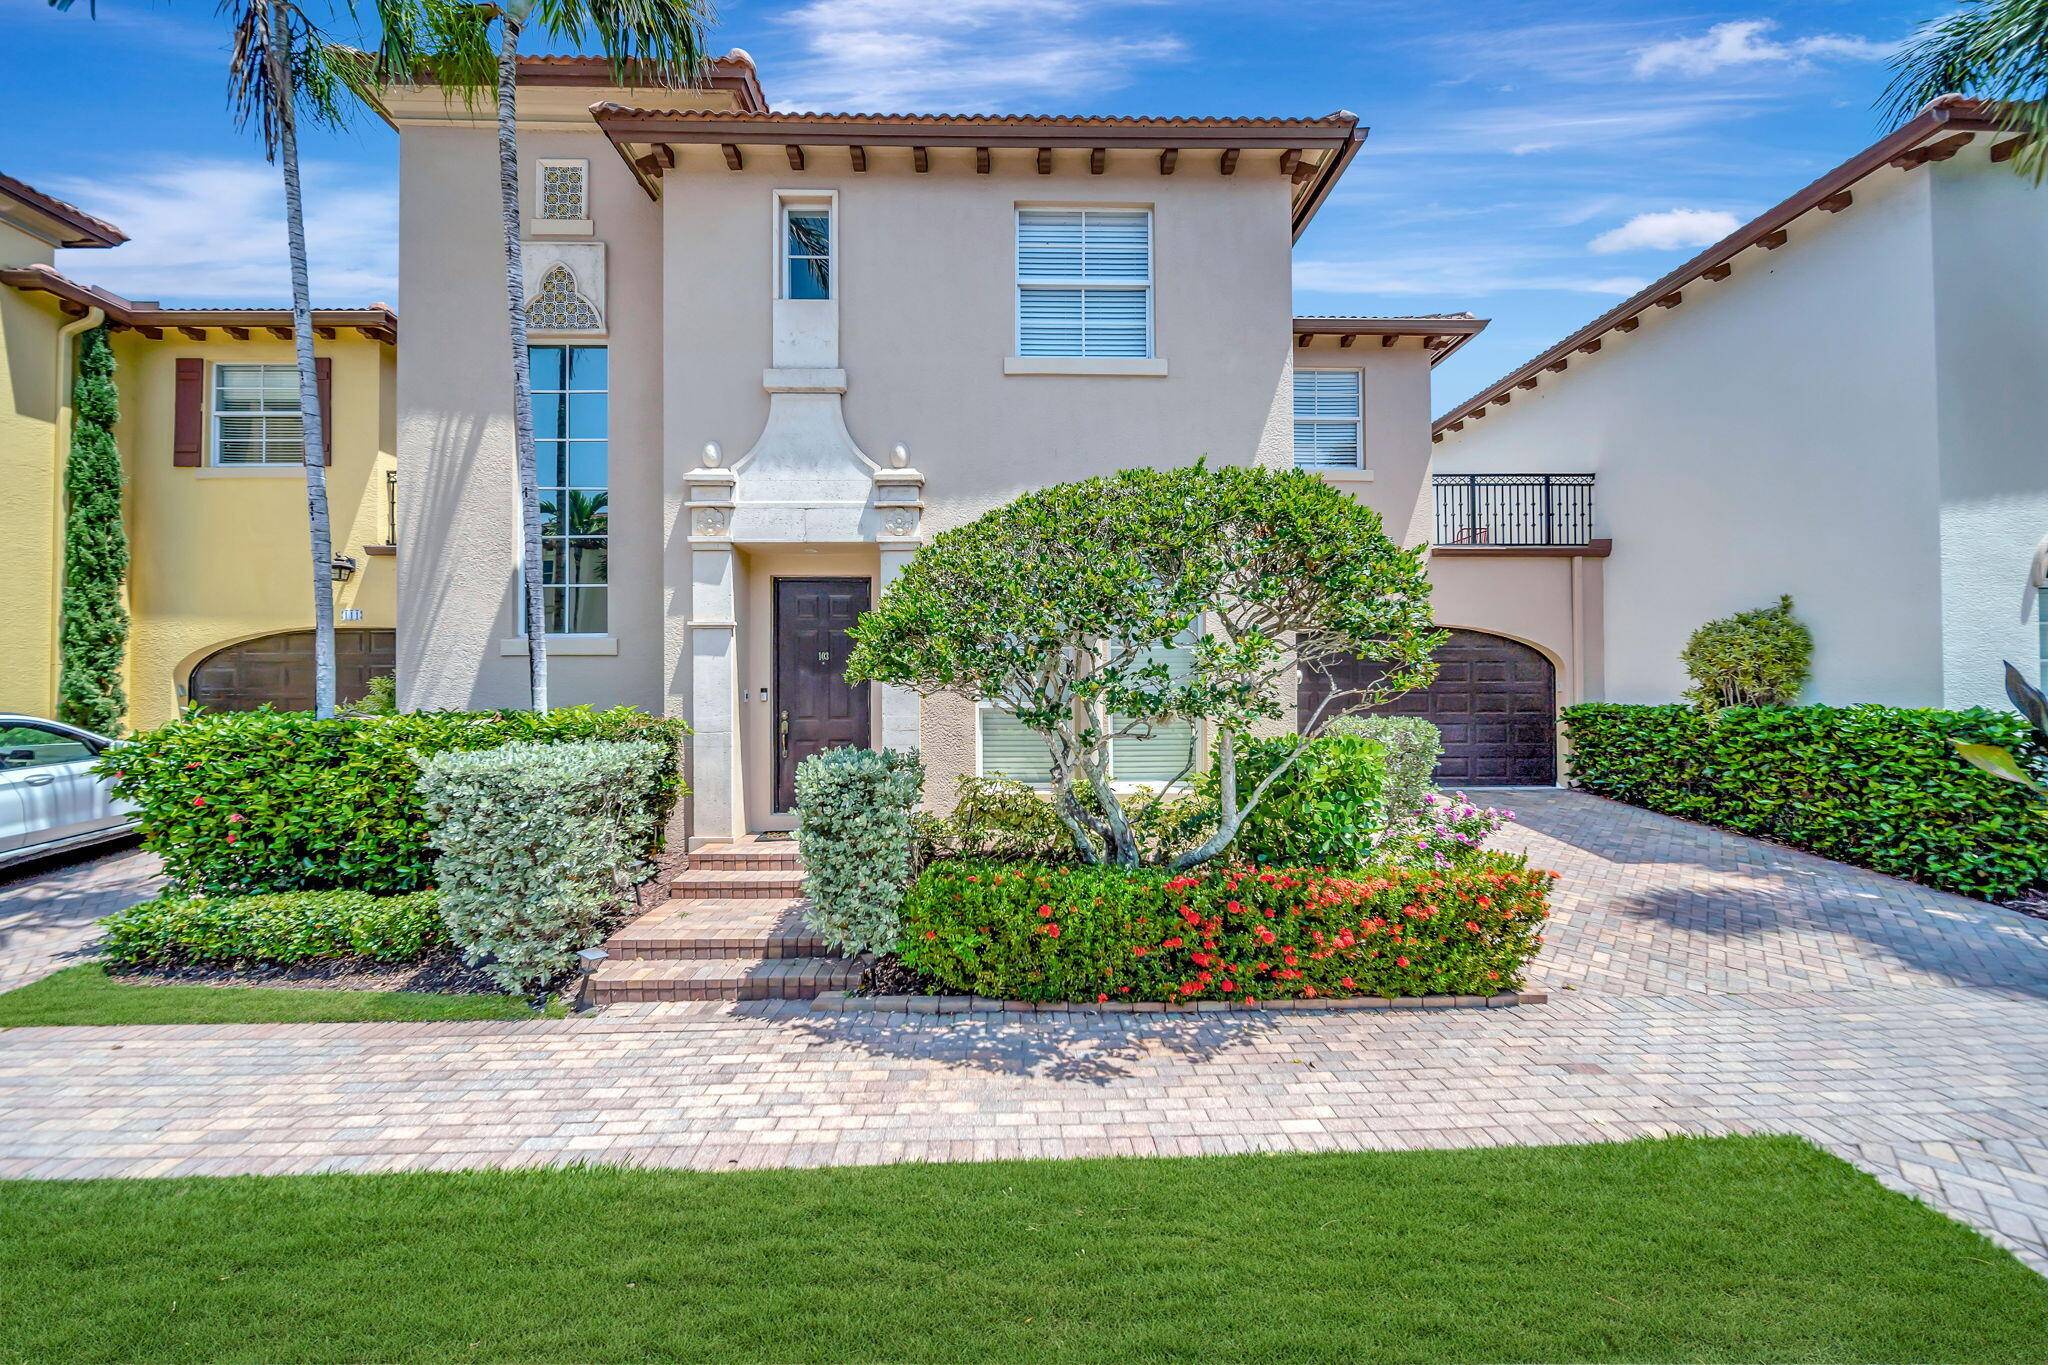 Welcome to East Boca Raton's highly sought after community of Royal Poinciana !